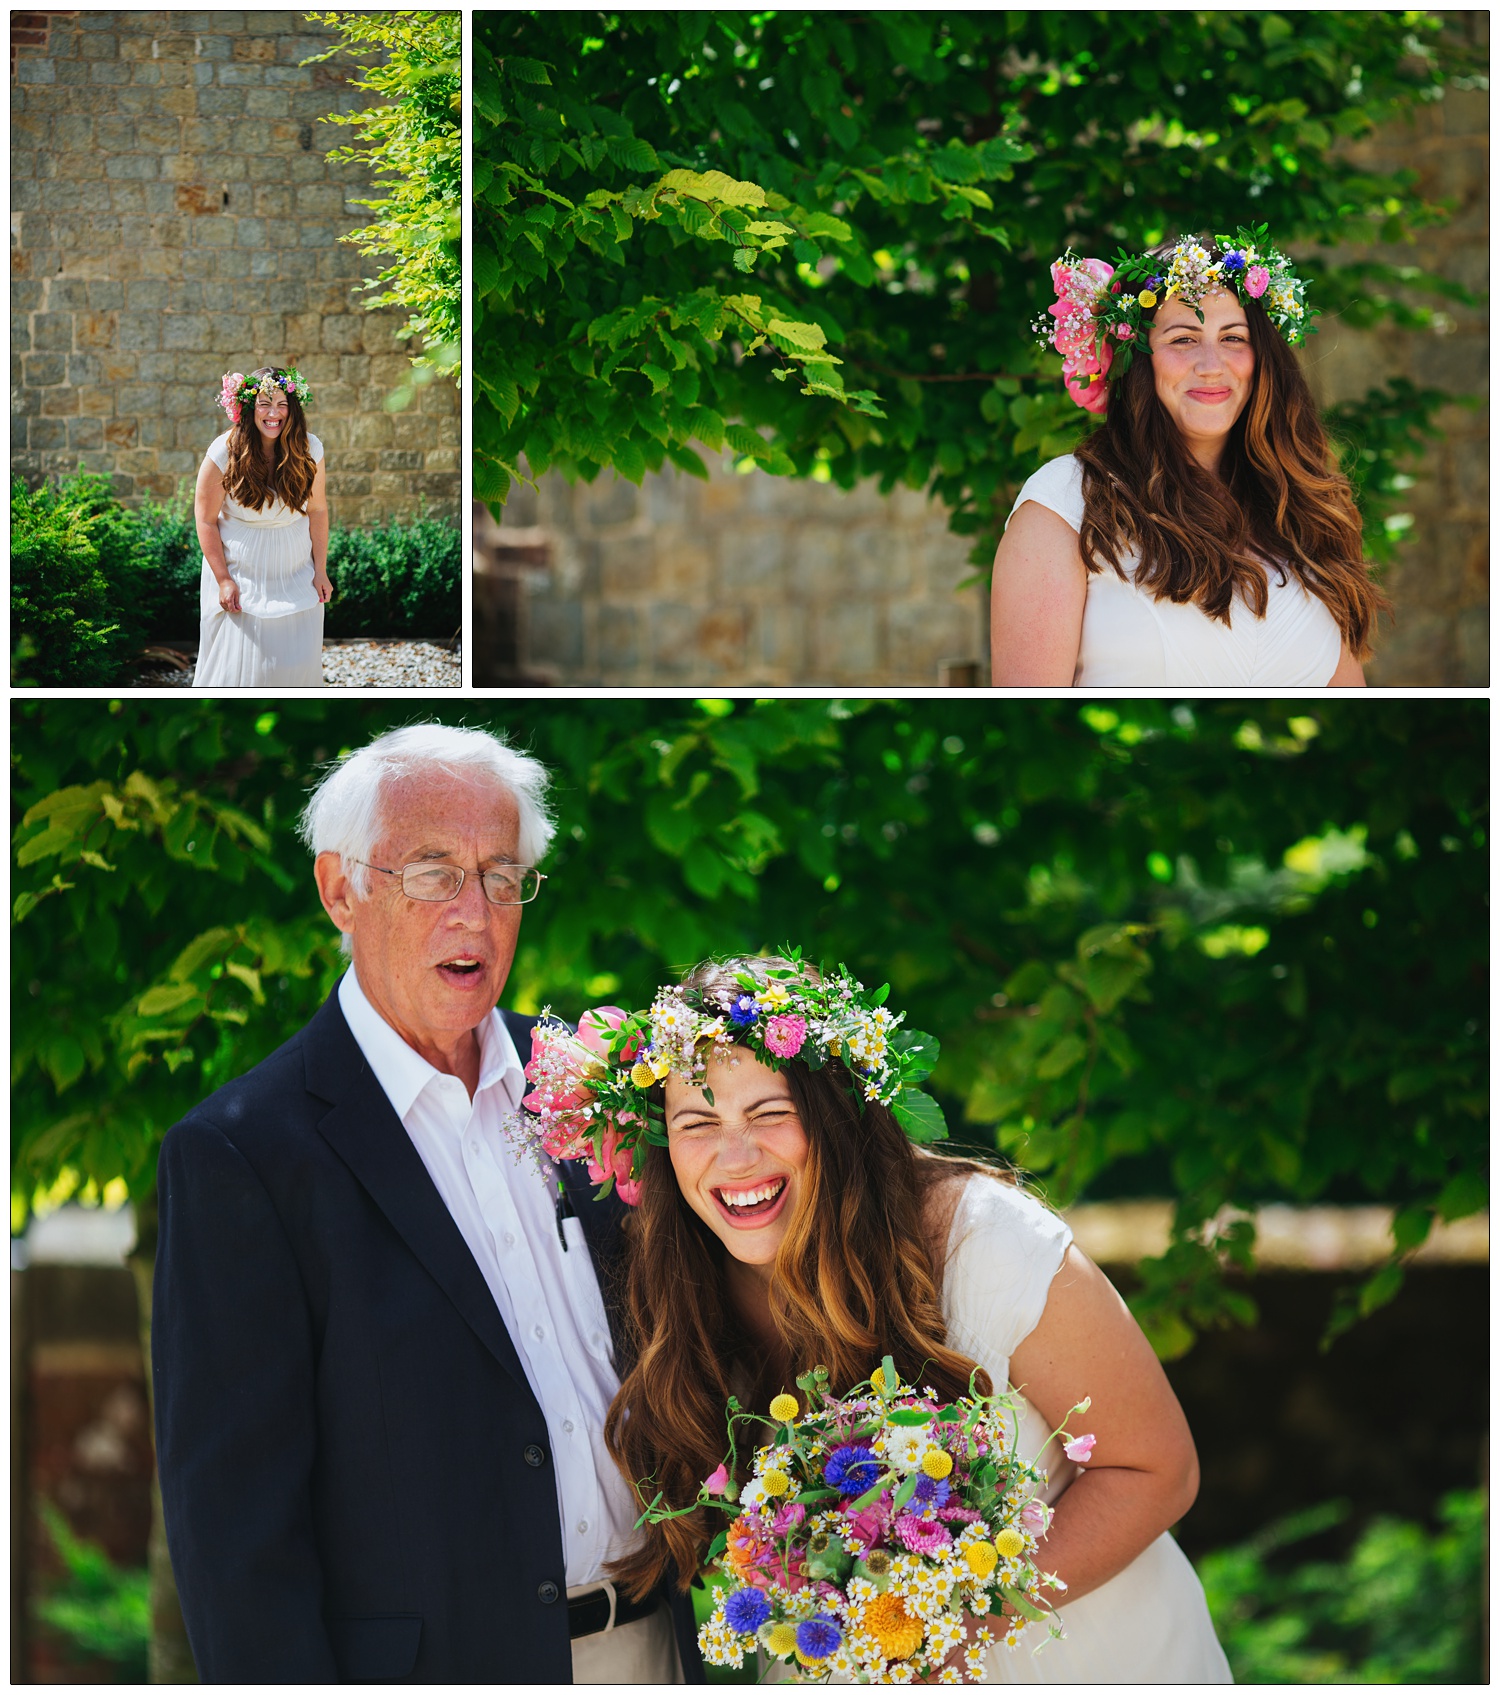 The bride is with her dad and she is laughing. She is carrying bright colourful flowers and has a flower crown on her head made by Jay Archer..